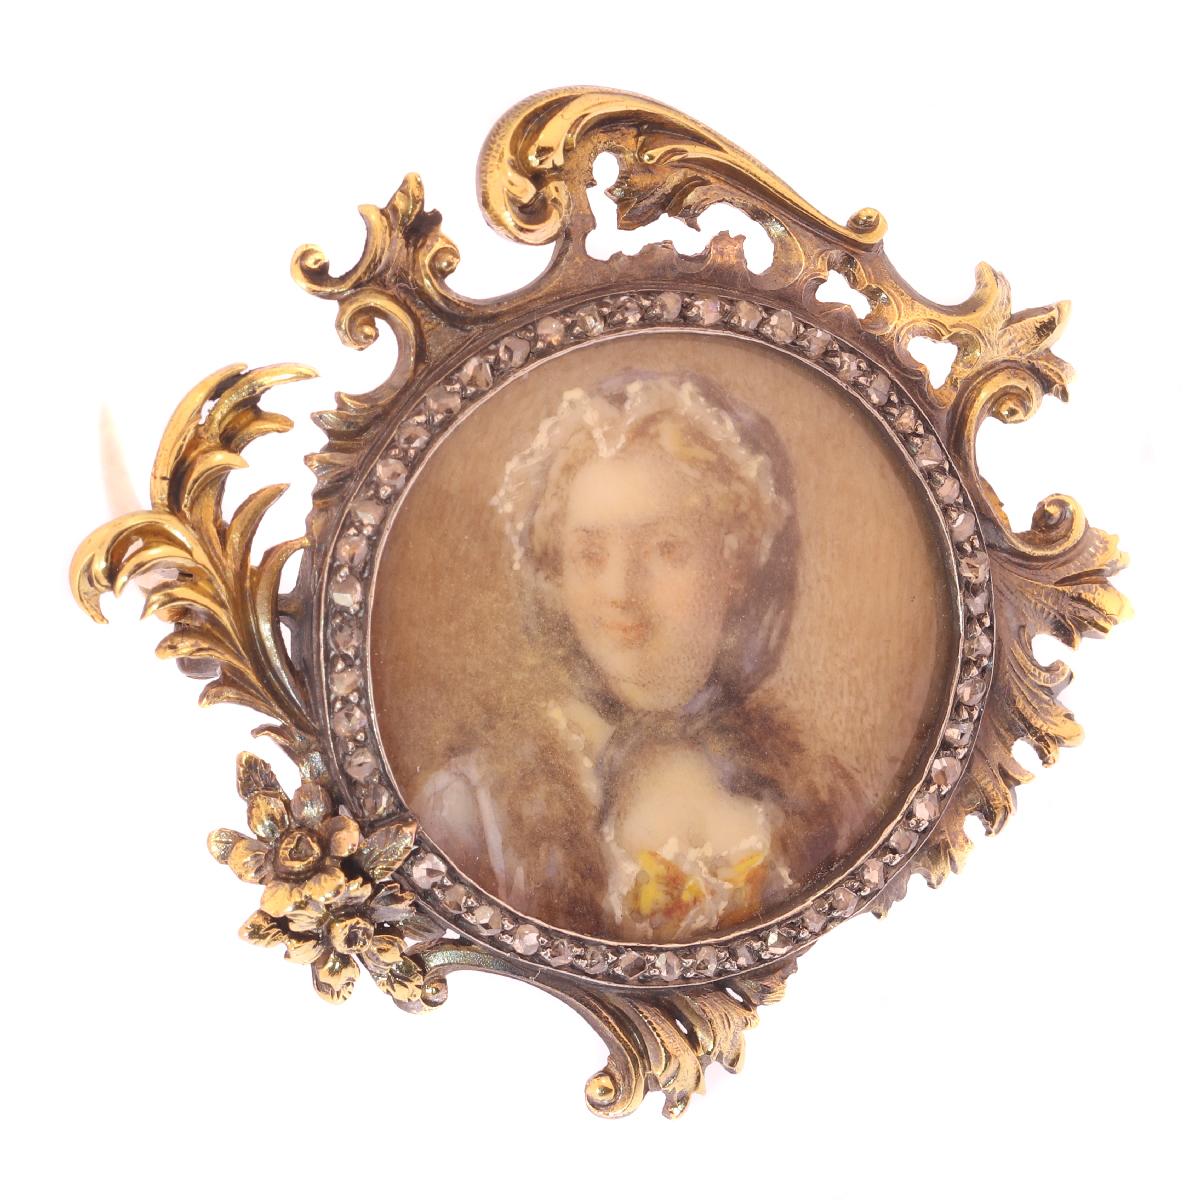 Romantic French Victorian Brooch Painted Miniature of Madame de Pompadour in Gold Frame